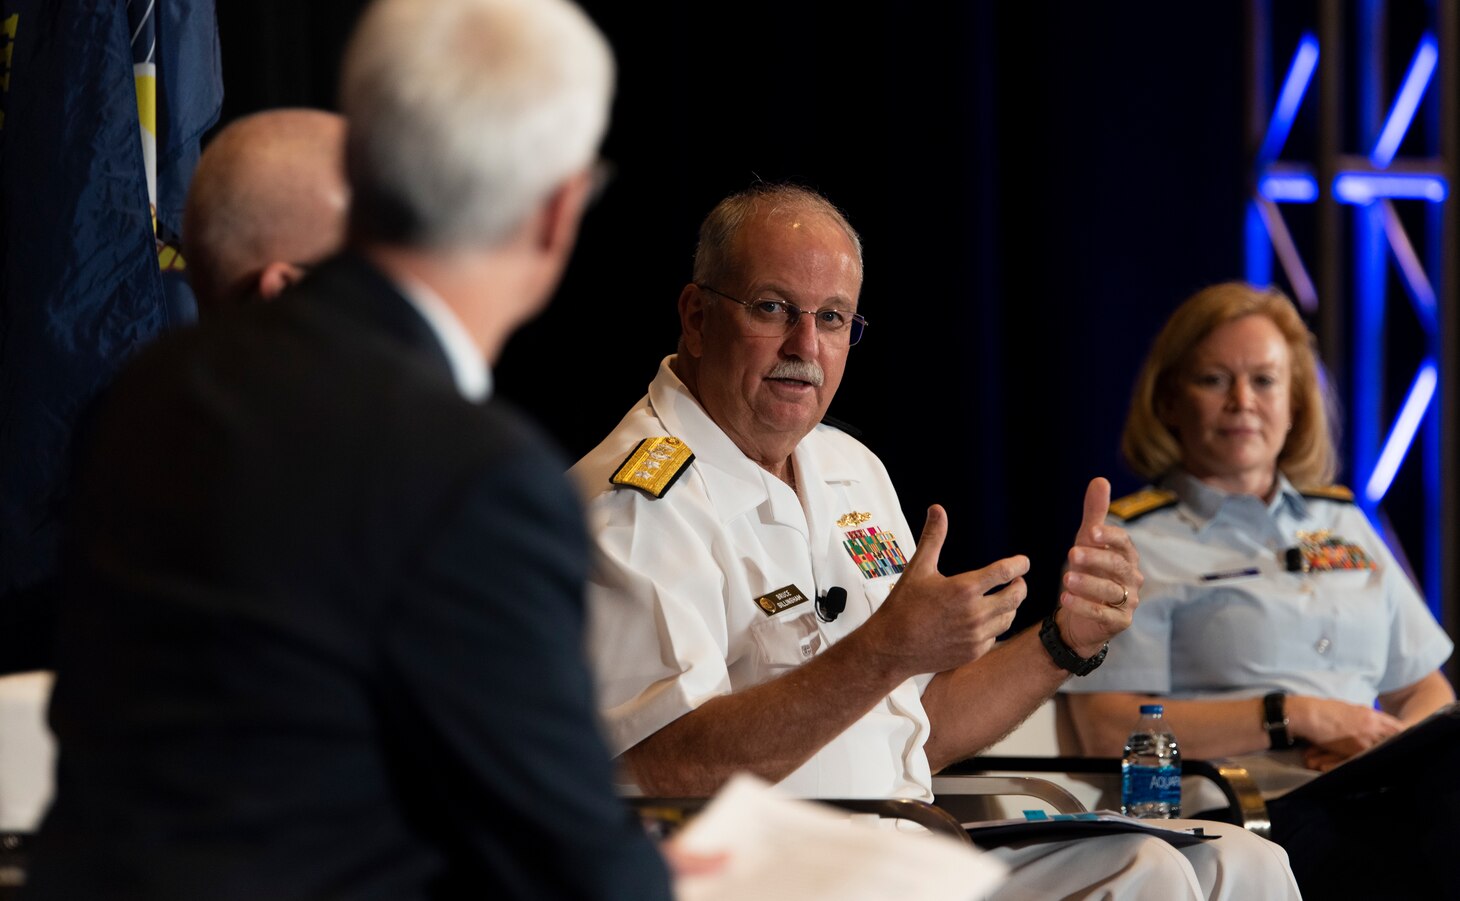 ear Adm. Bruce Gillingham, Surgeon General of the U.S. Navy, speaks during the “COVID Response and Post-Pandemic National Security” panel at the Sea-Air-Space 2021 exposition.